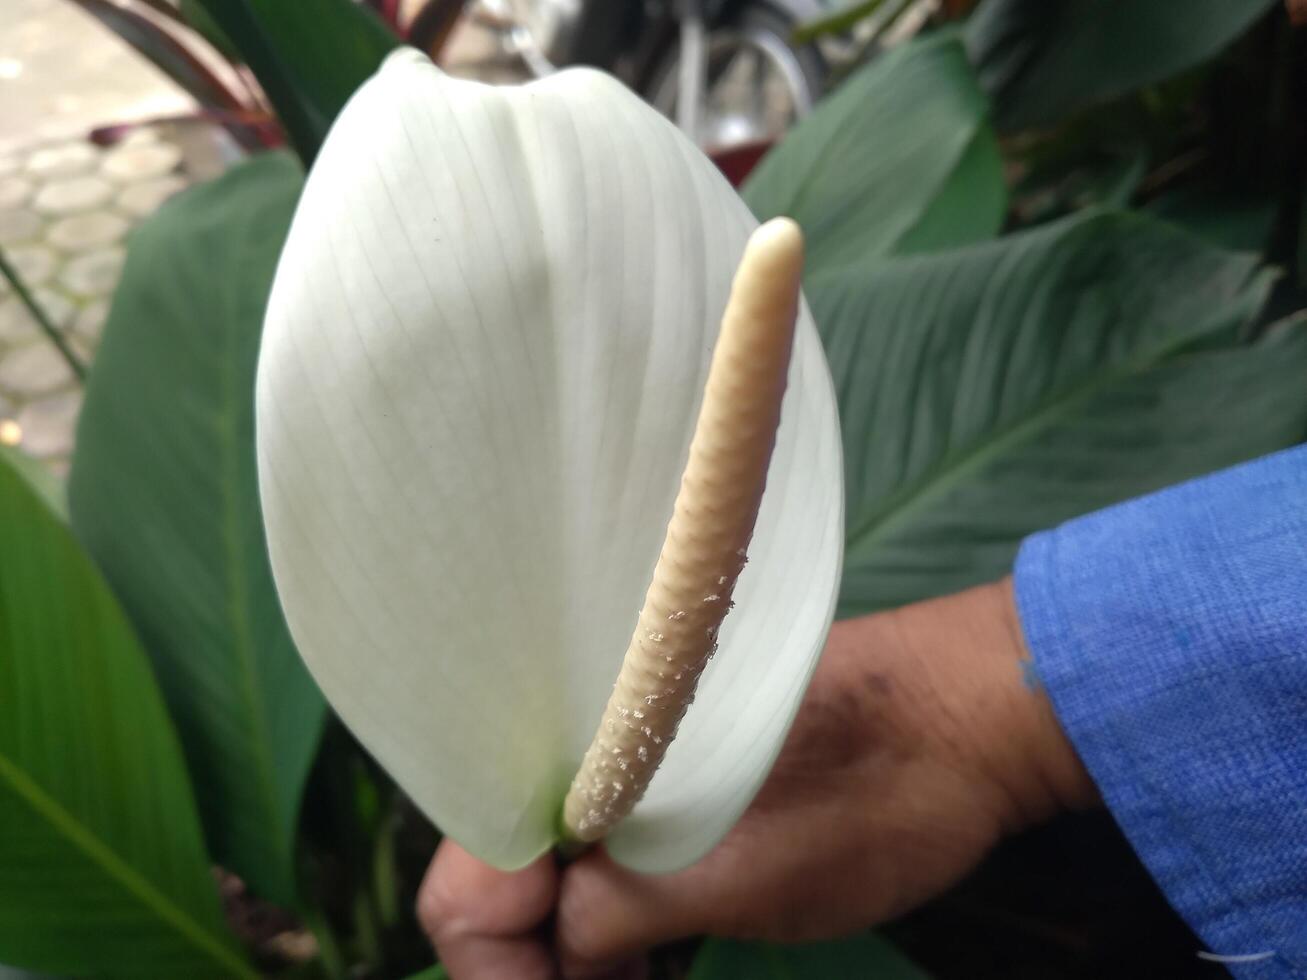 A women hand holding a white lily flower photo